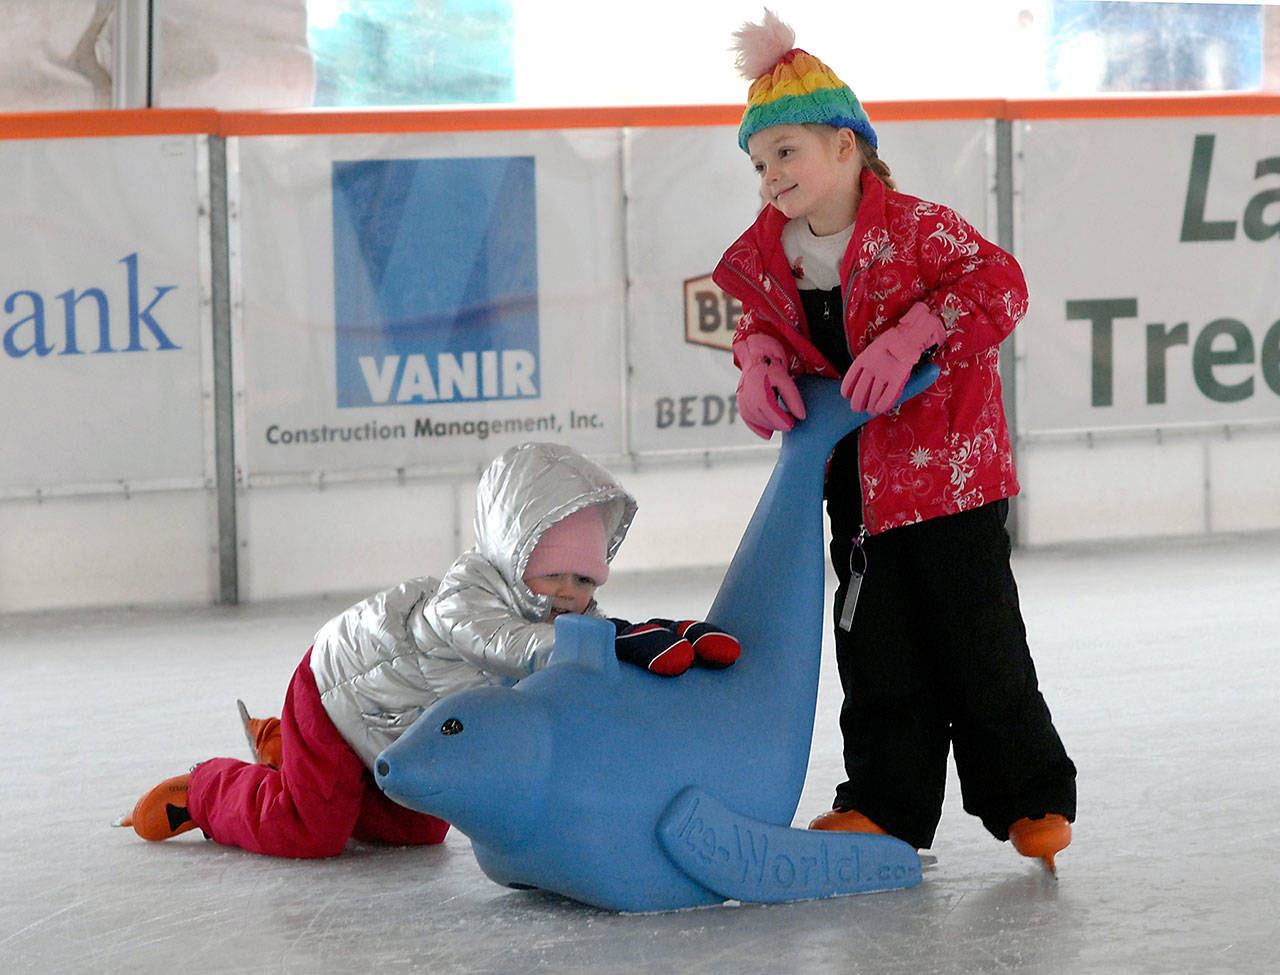 Siblings Meredith Davenport, 5, left, and Nora Davenport, 6, both of Yuba City, Calif., try their hand at ice skating Wednesday at the Winter Ice Village in downtown Port Angeles. (Keith Thorpe/Peninsula Daily News)